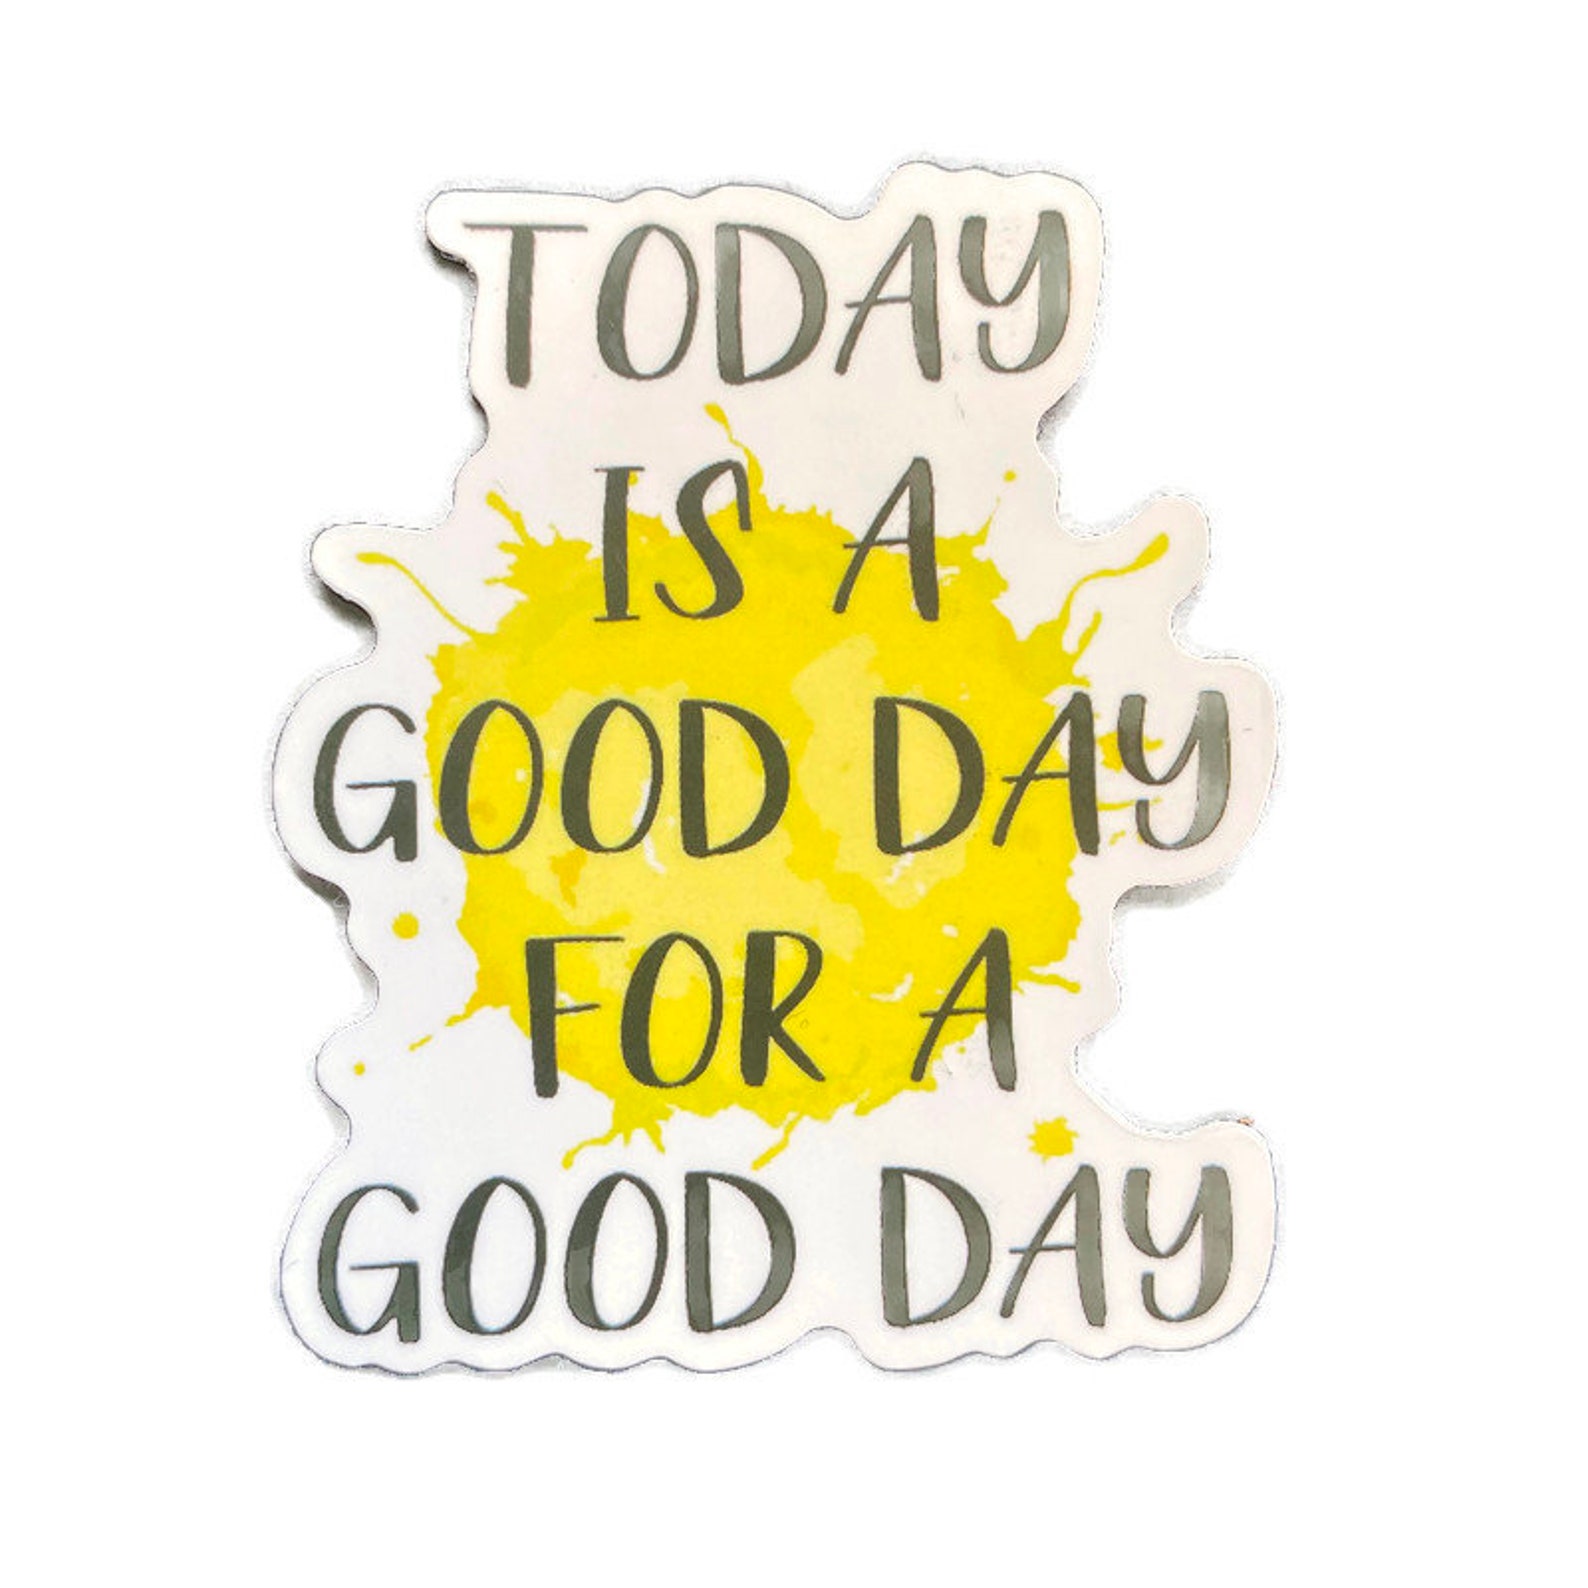 Today Is A Good Day For A Good Day Sticker Inspirational | Etsy